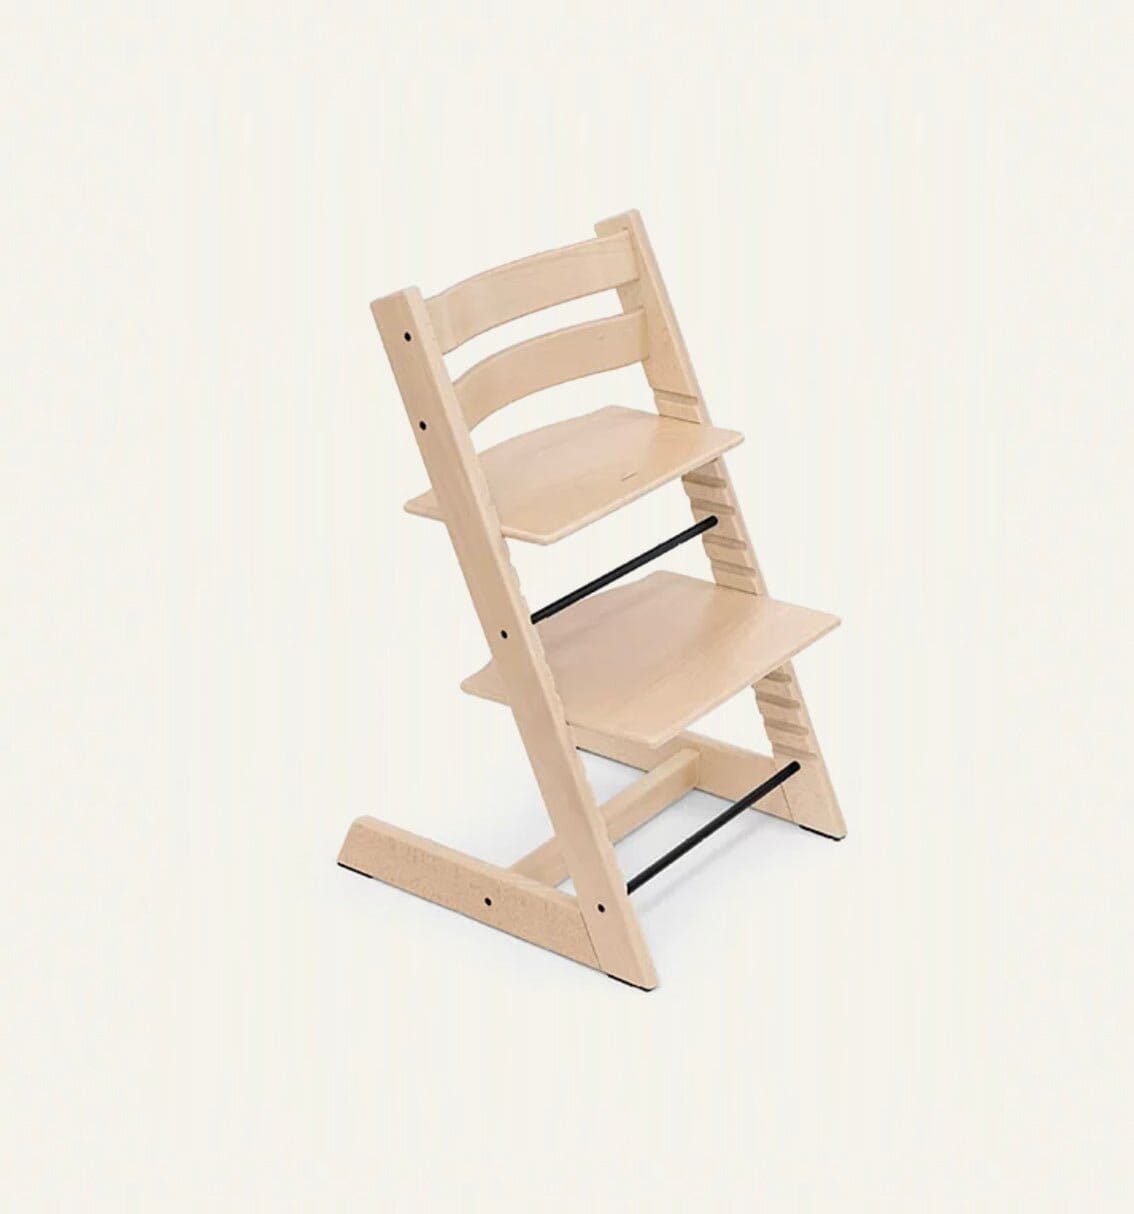 Rent the Stokke Tripp Trapp High Chair from just £14 per month!